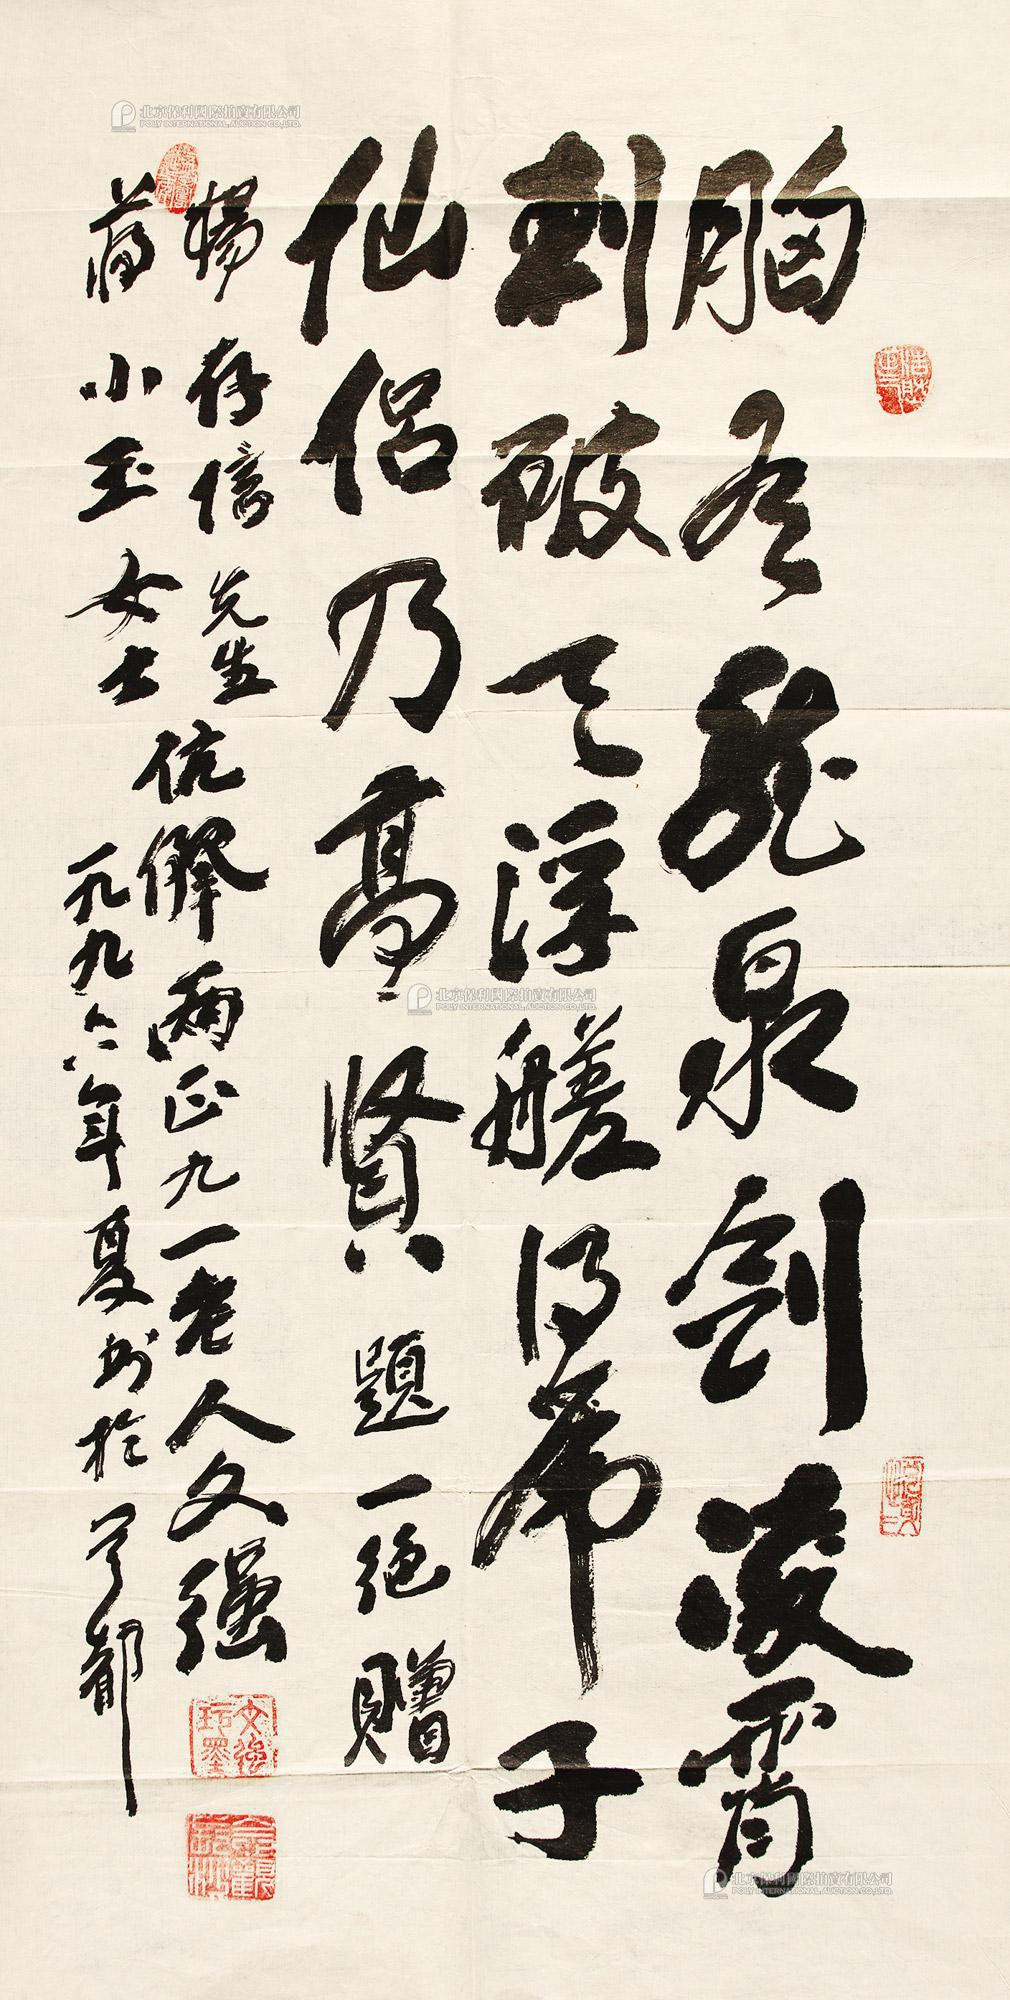 Calligraphy by Wen Qiang